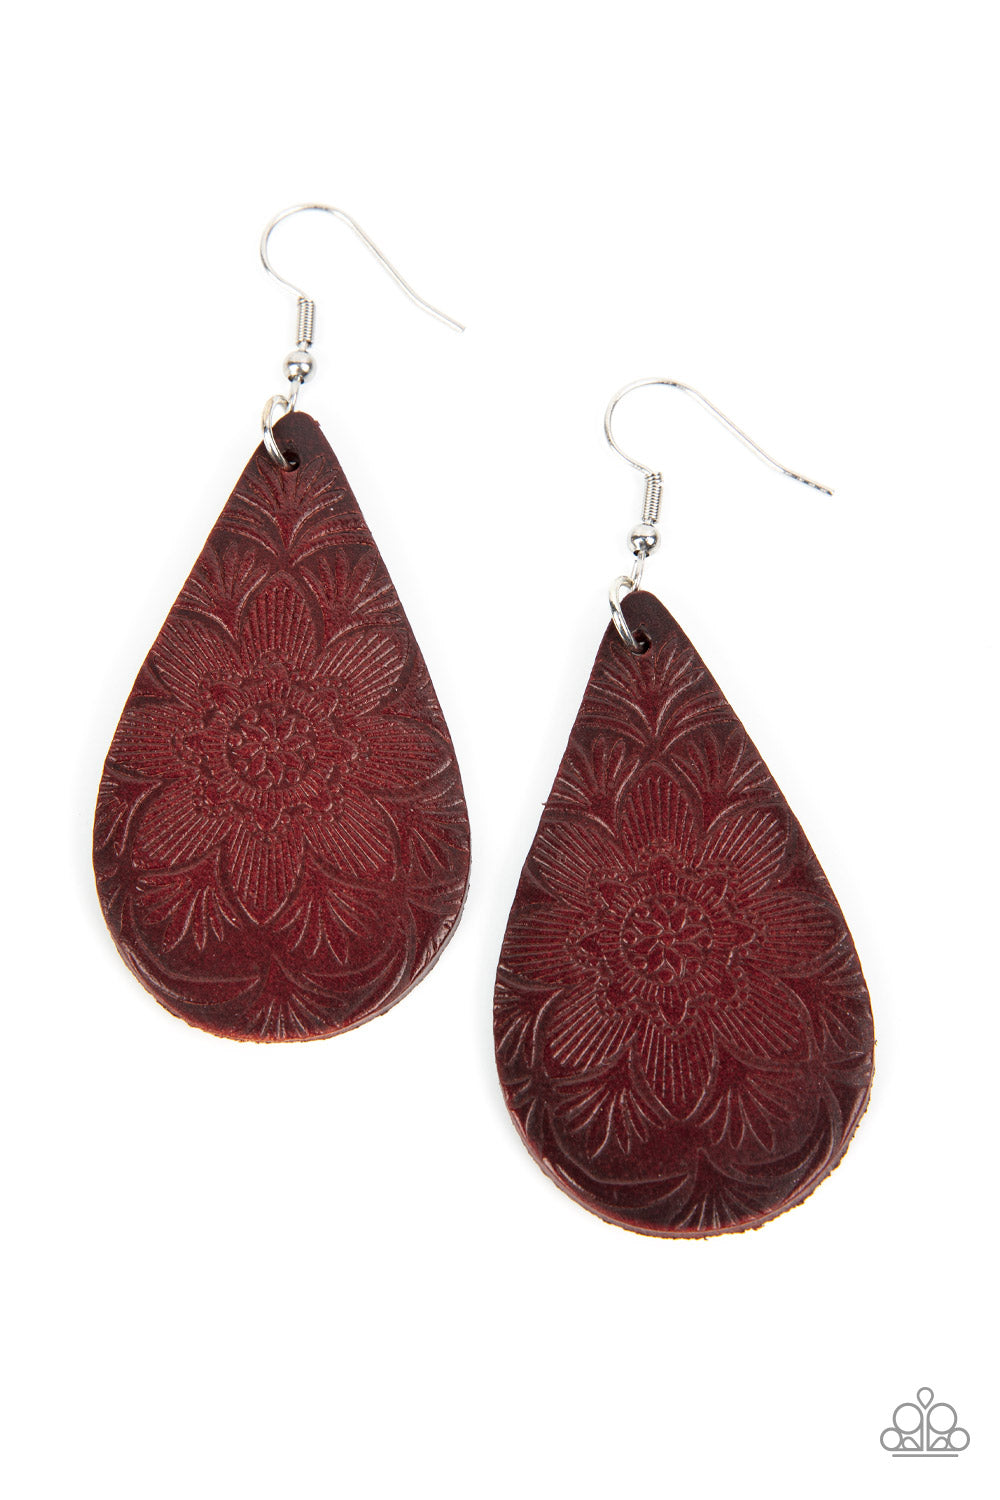 Paparazzi Subtropical Seasons - Brown Leather Earrings embossed in a tropical floral pattern, a distressed brown leather teardrop swings from the ear for a whimsically rustic flair. Earring attaches to a standard fishhook fitting.  Sold as one pair of earrings.